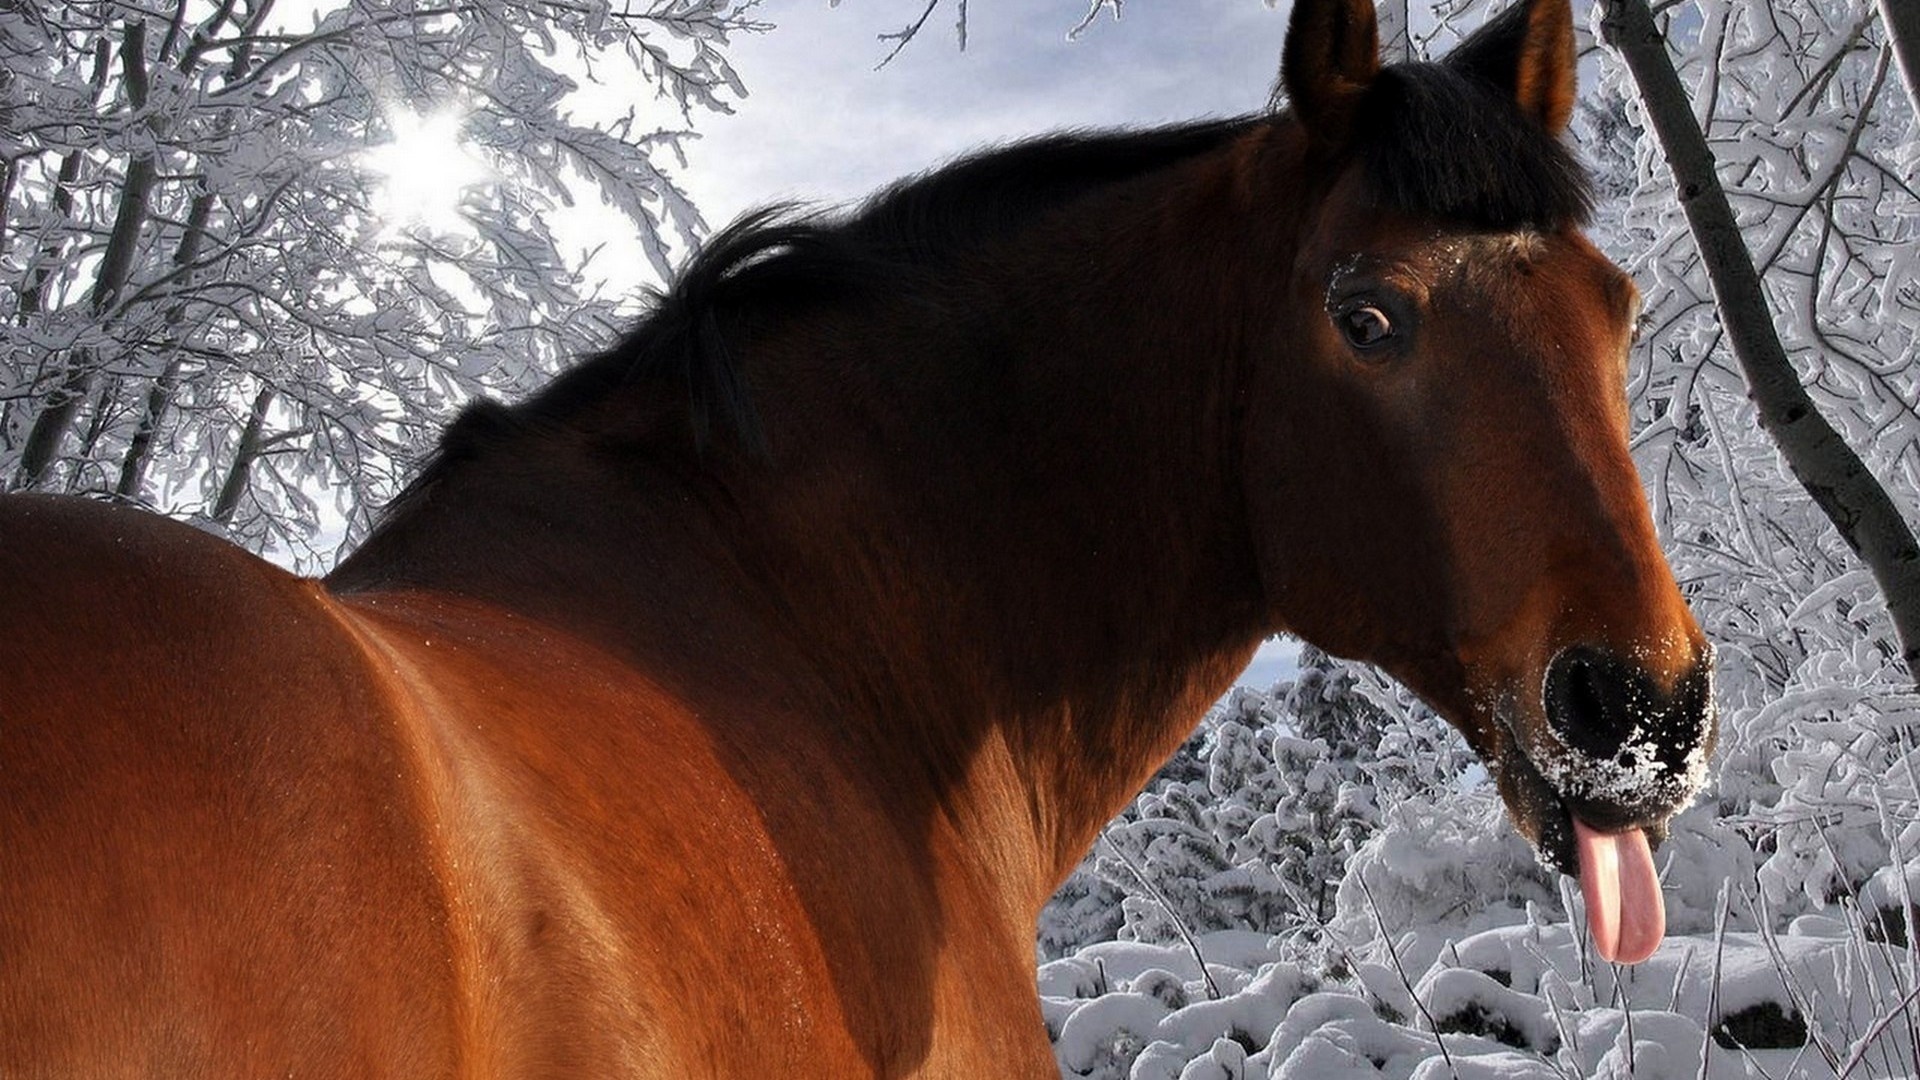 Horse Licking Snow in Winter